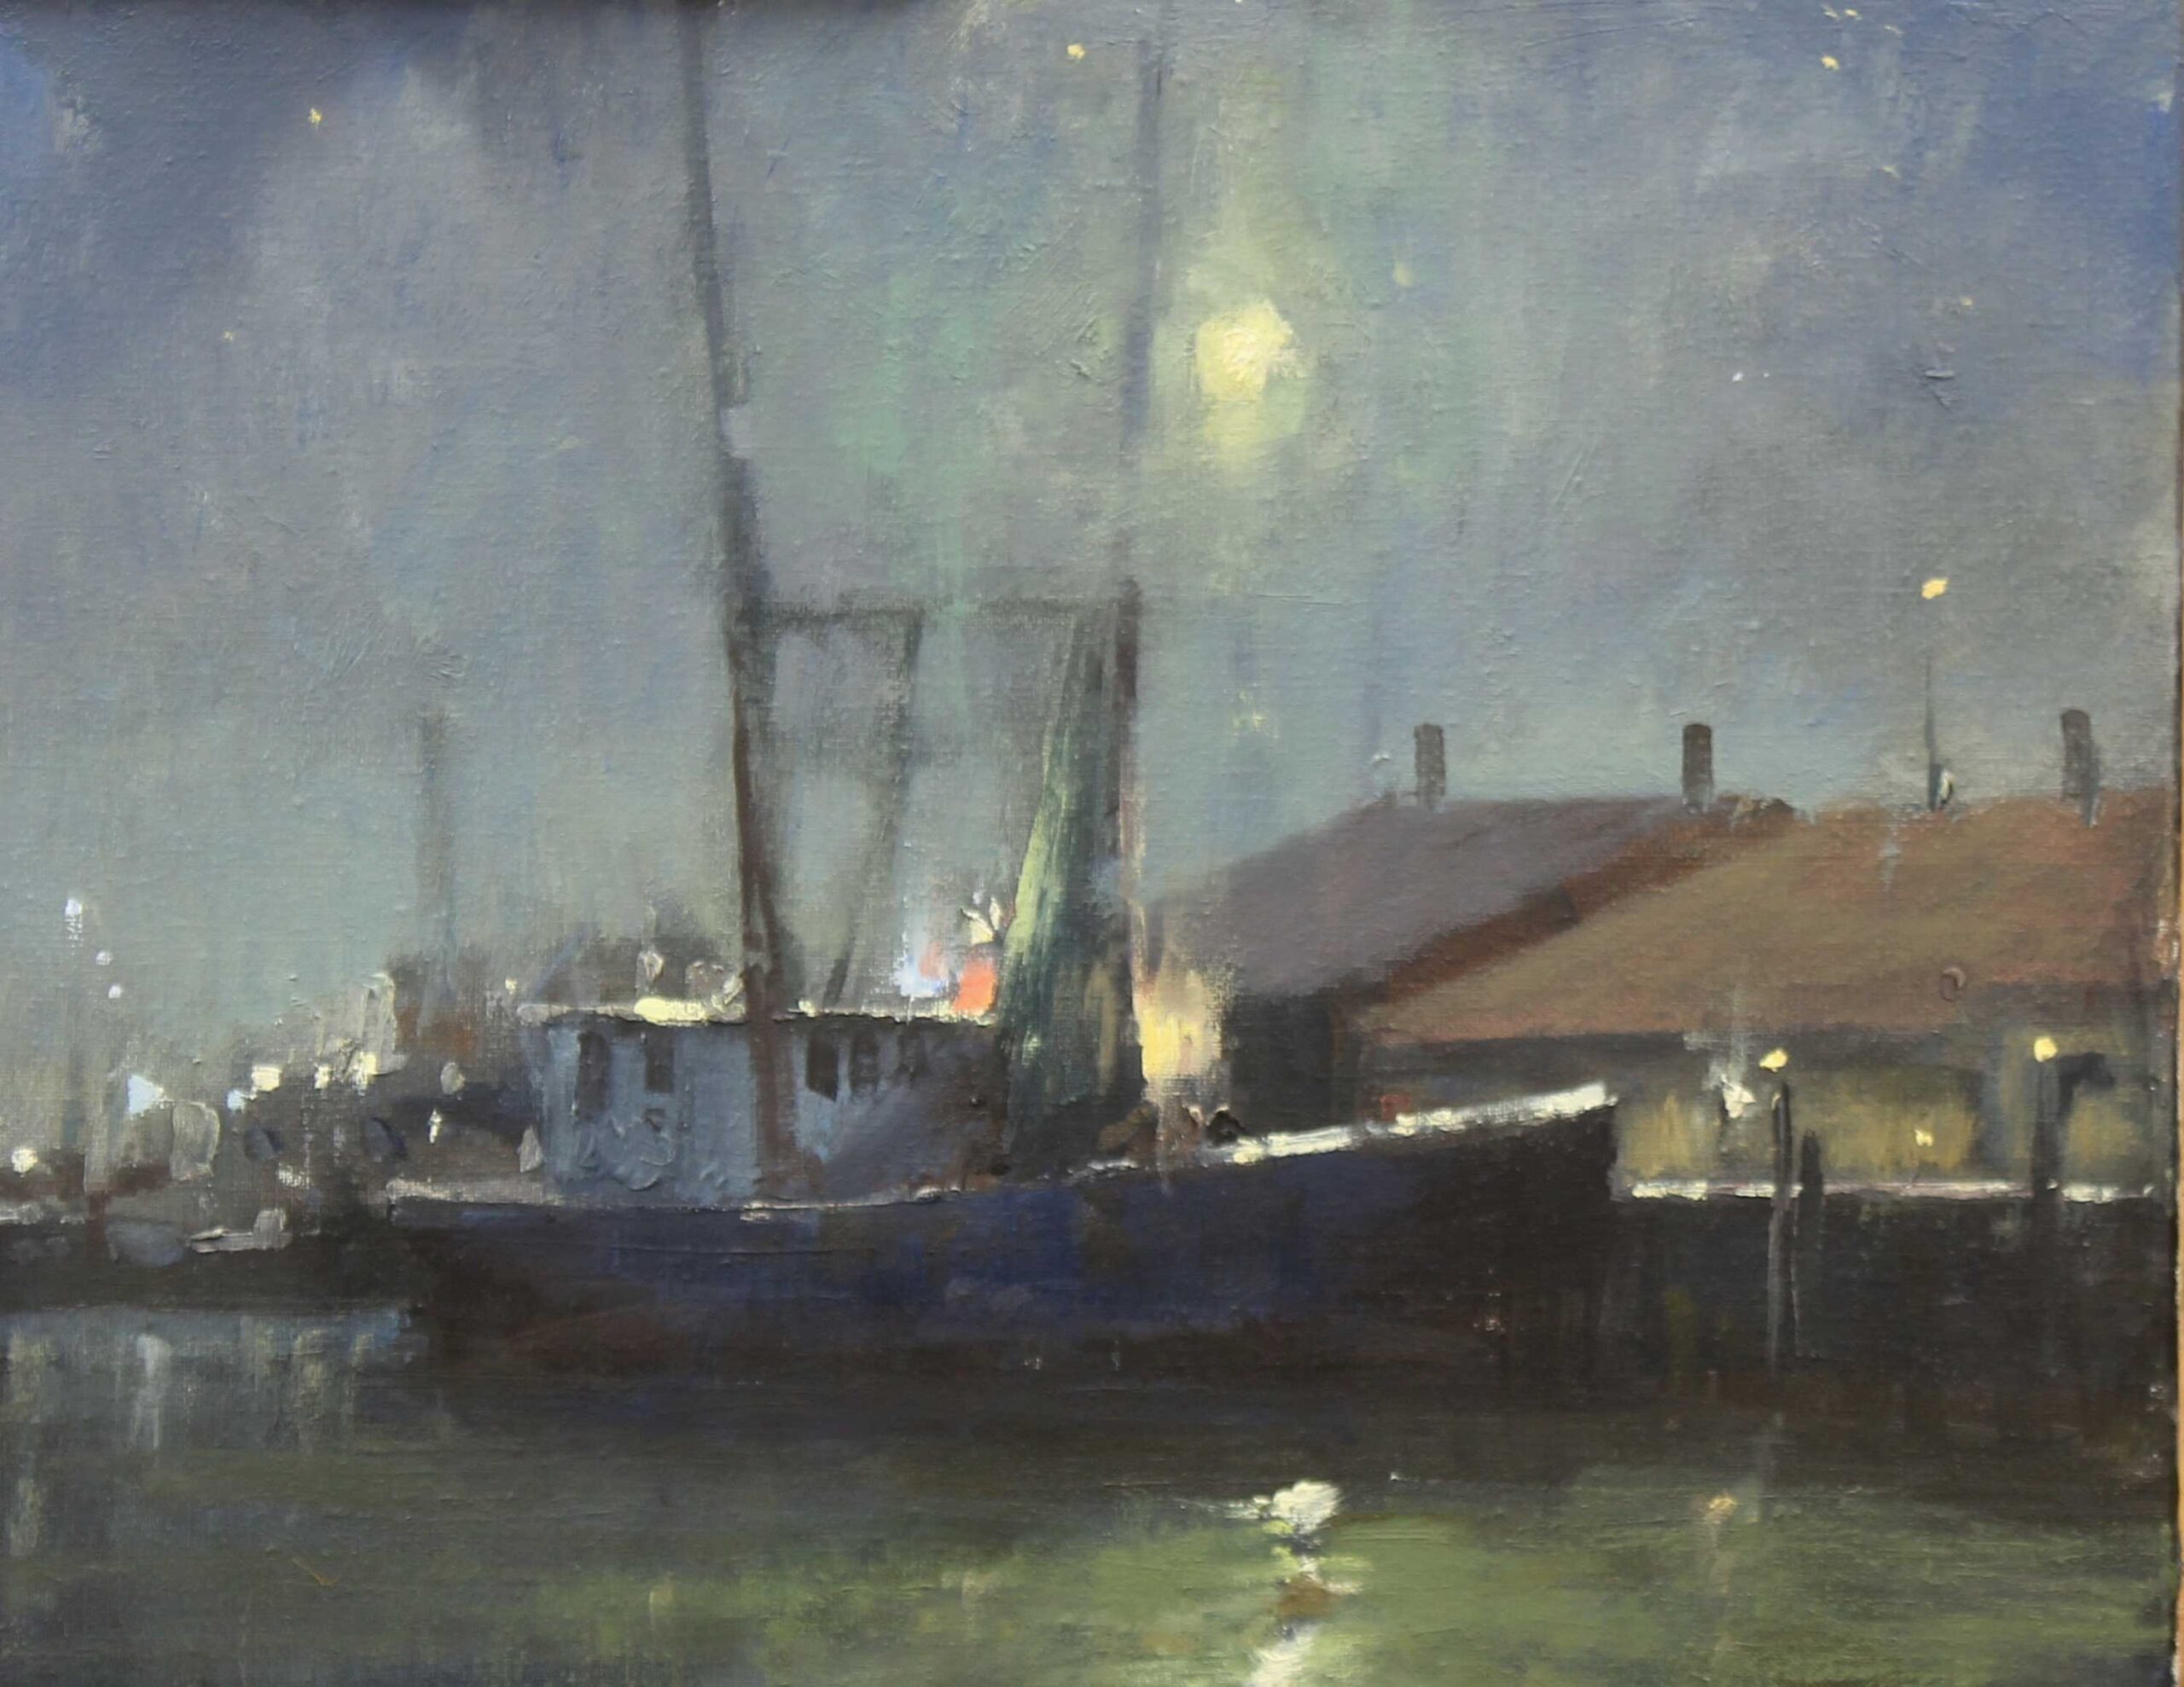 Plein air painter Roger Dale Brown, "Maritime Night," 2020, oil on linen, 16 x 20 in., private collection